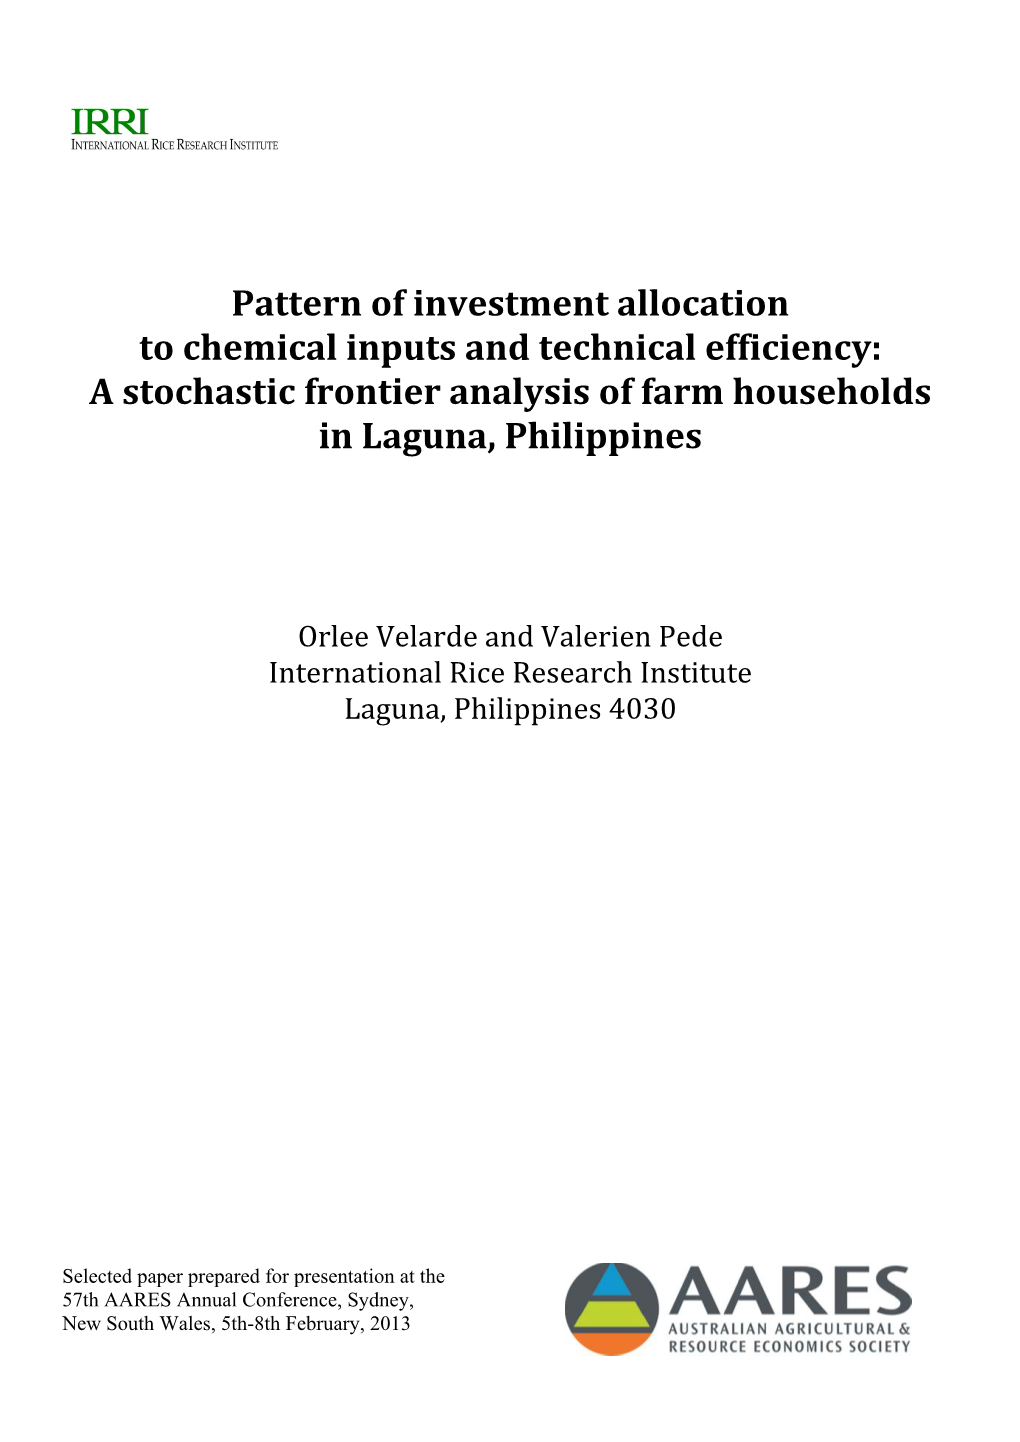 Pattern of Investment Allocation to Chemical Inputs and Technical Efficiency: a Stochastic Frontier Analysis of Farm Households in Laguna, Philippines